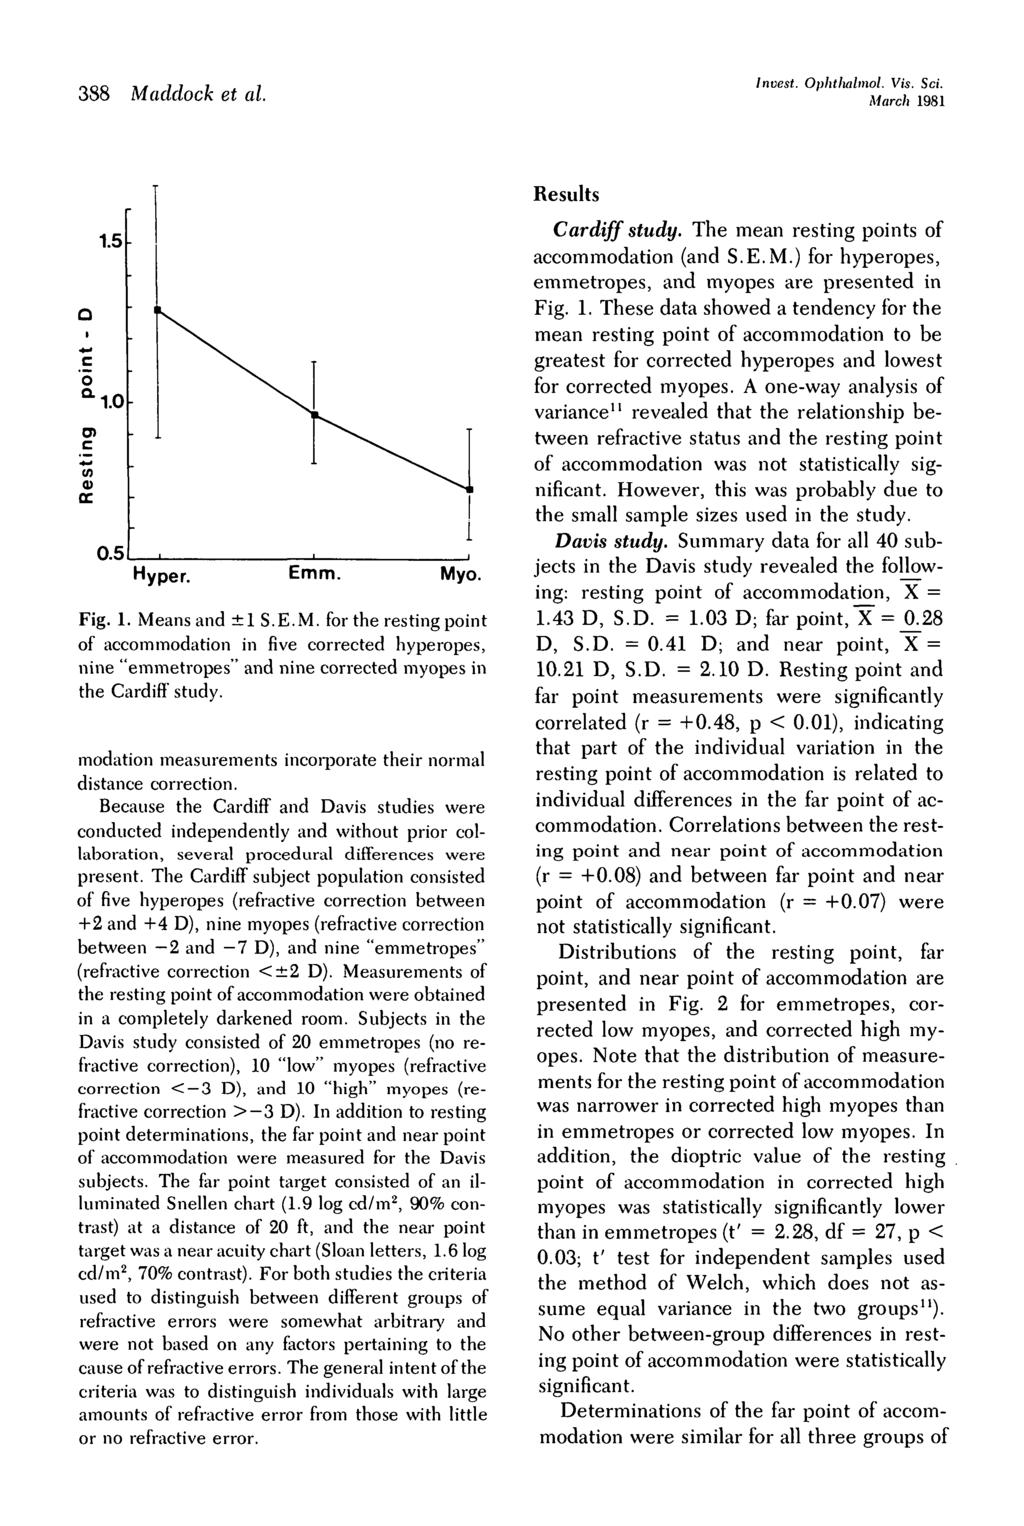 388 Macldock et al. Invest. Ophtltalmol. Vis. Sci. March 1981 CD c a> cc 1.5 1..5 H yper. Emm. Myo. Fig. 1. Means and ±1 S.E.M. for the resting point of accommodation in five corrected hyperopes, nine "emmetropes" and nine corrected myopes in the Cardiff study.